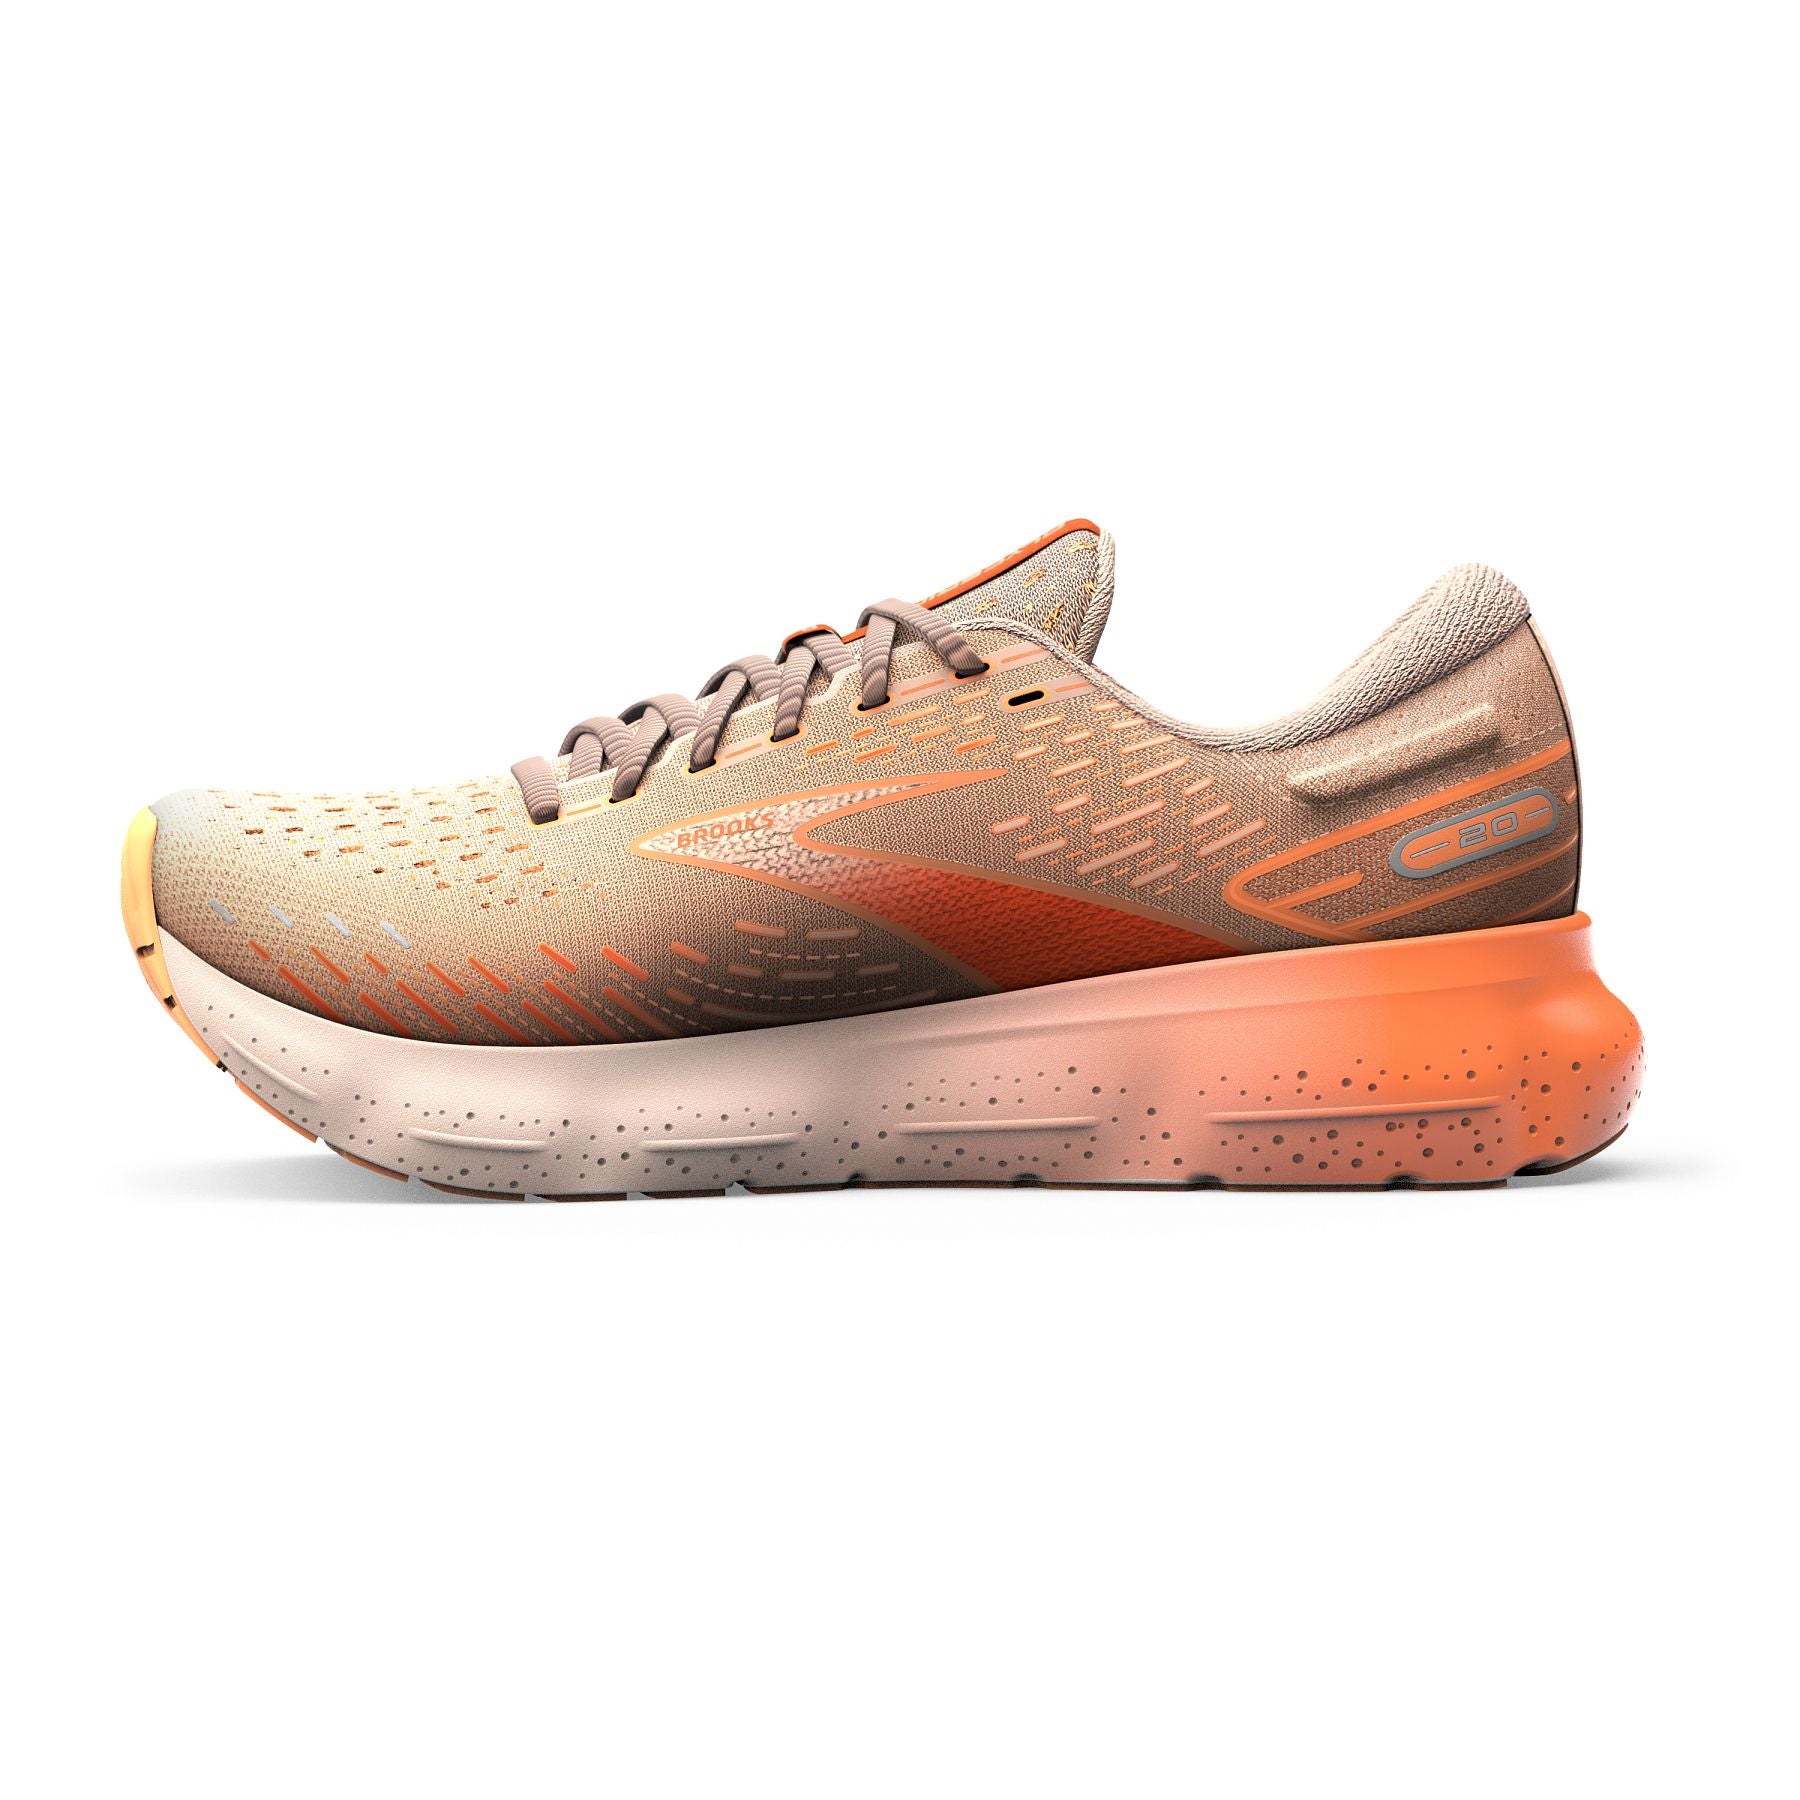 Medial view of the Women's Glycerin 20 by Brook's in the color Peach/Tangerine/Orange